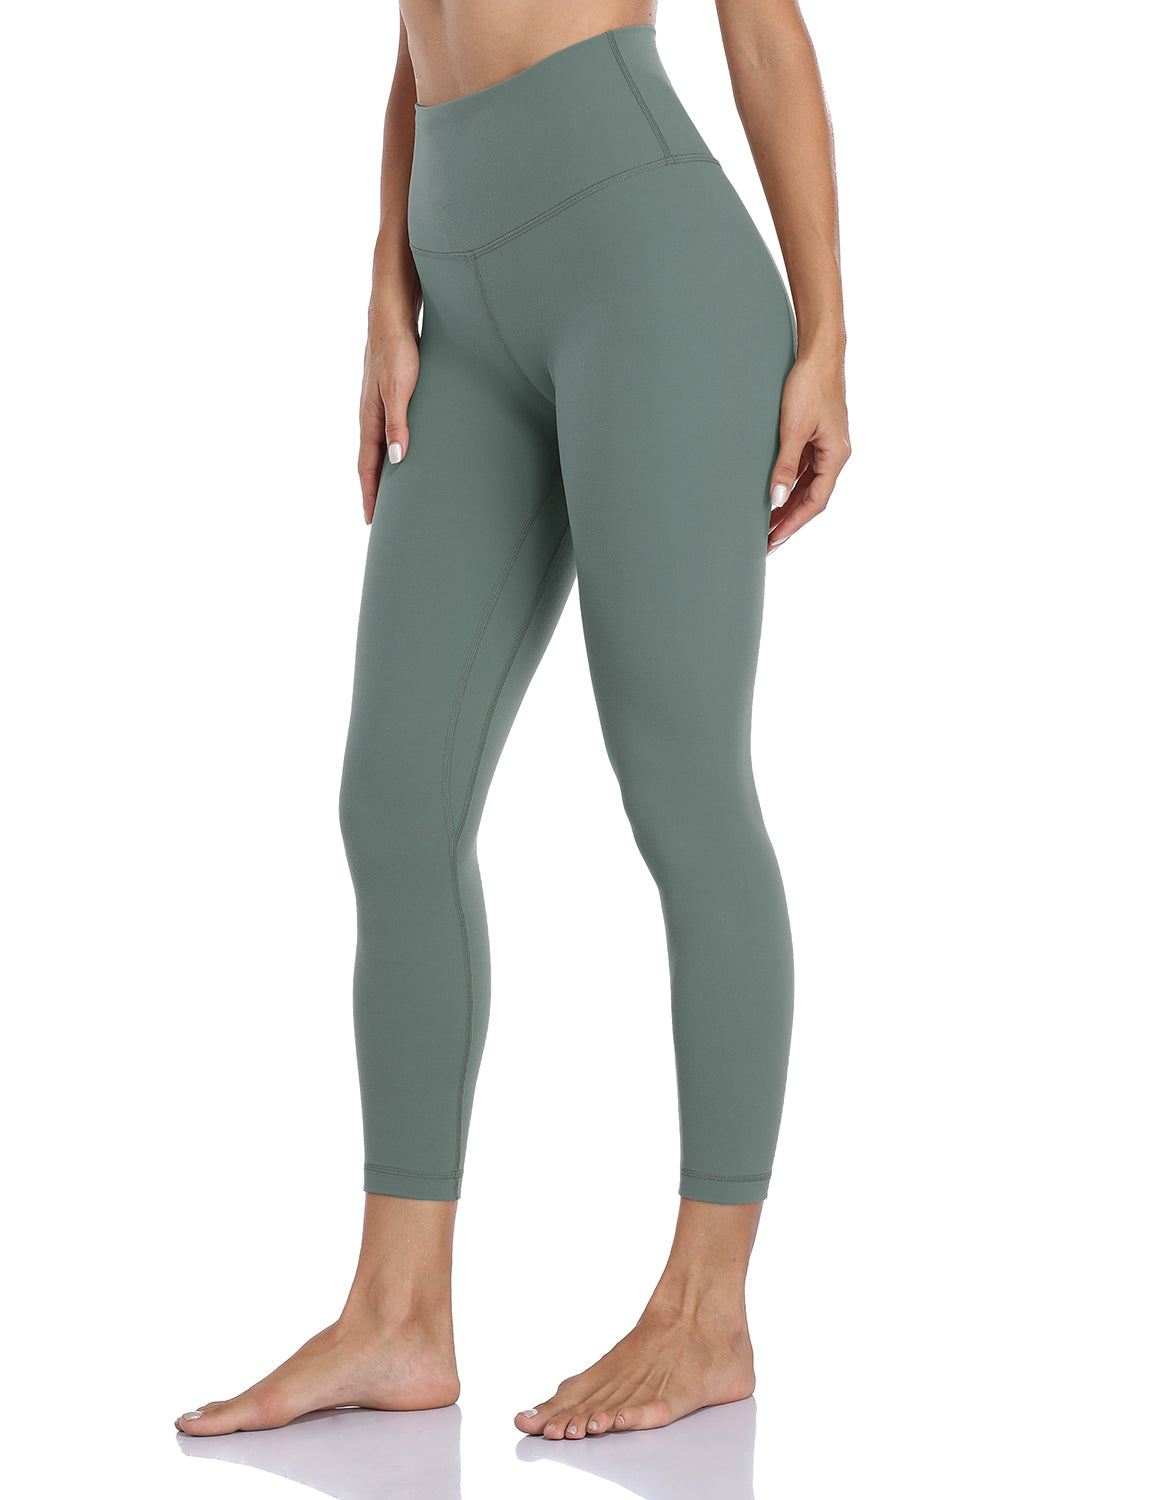 HeyNuts Essential 7/8 Leggings, Buttery Soft Pants Hawthorn Athletic Yoga  Pants 25'', Sapphire Blue, M : Buy Online at Best Price in KSA - Souq is  now : Fashion